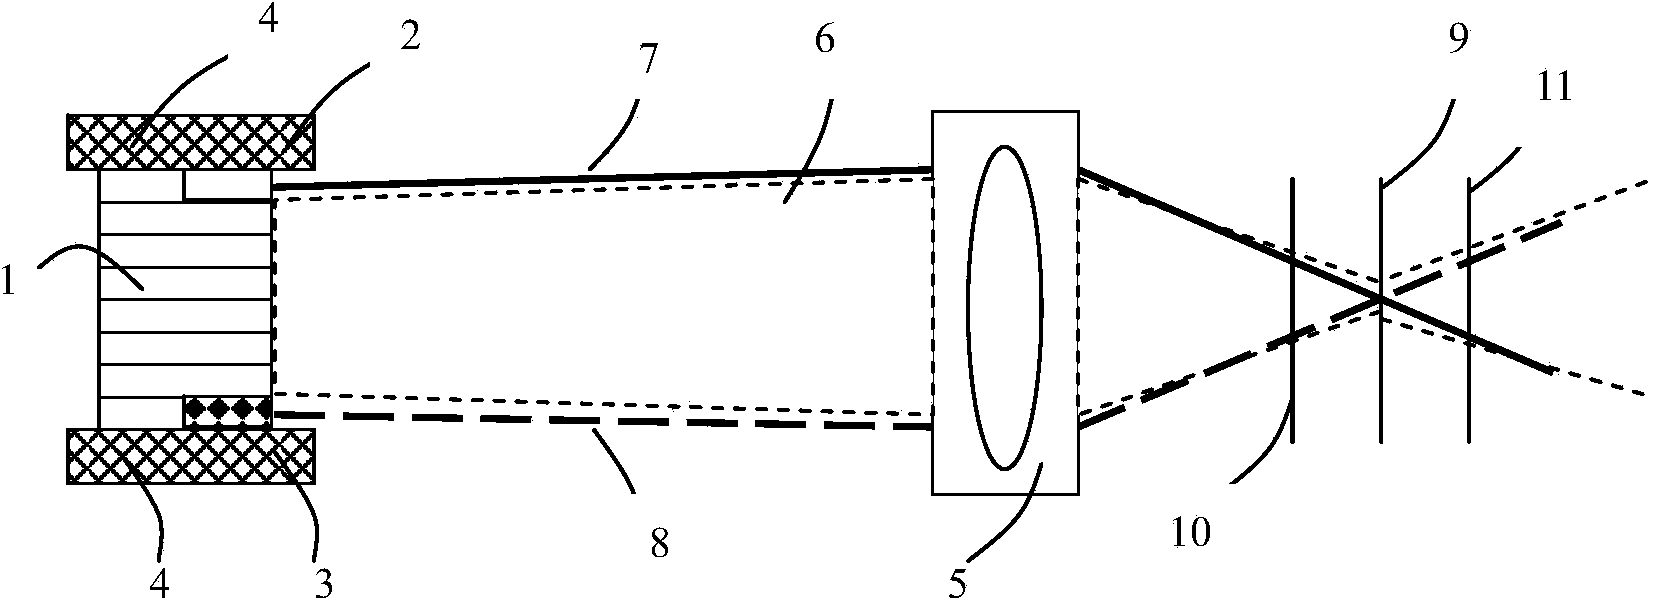 High-power semiconductor laser focus indicator used for laser processing